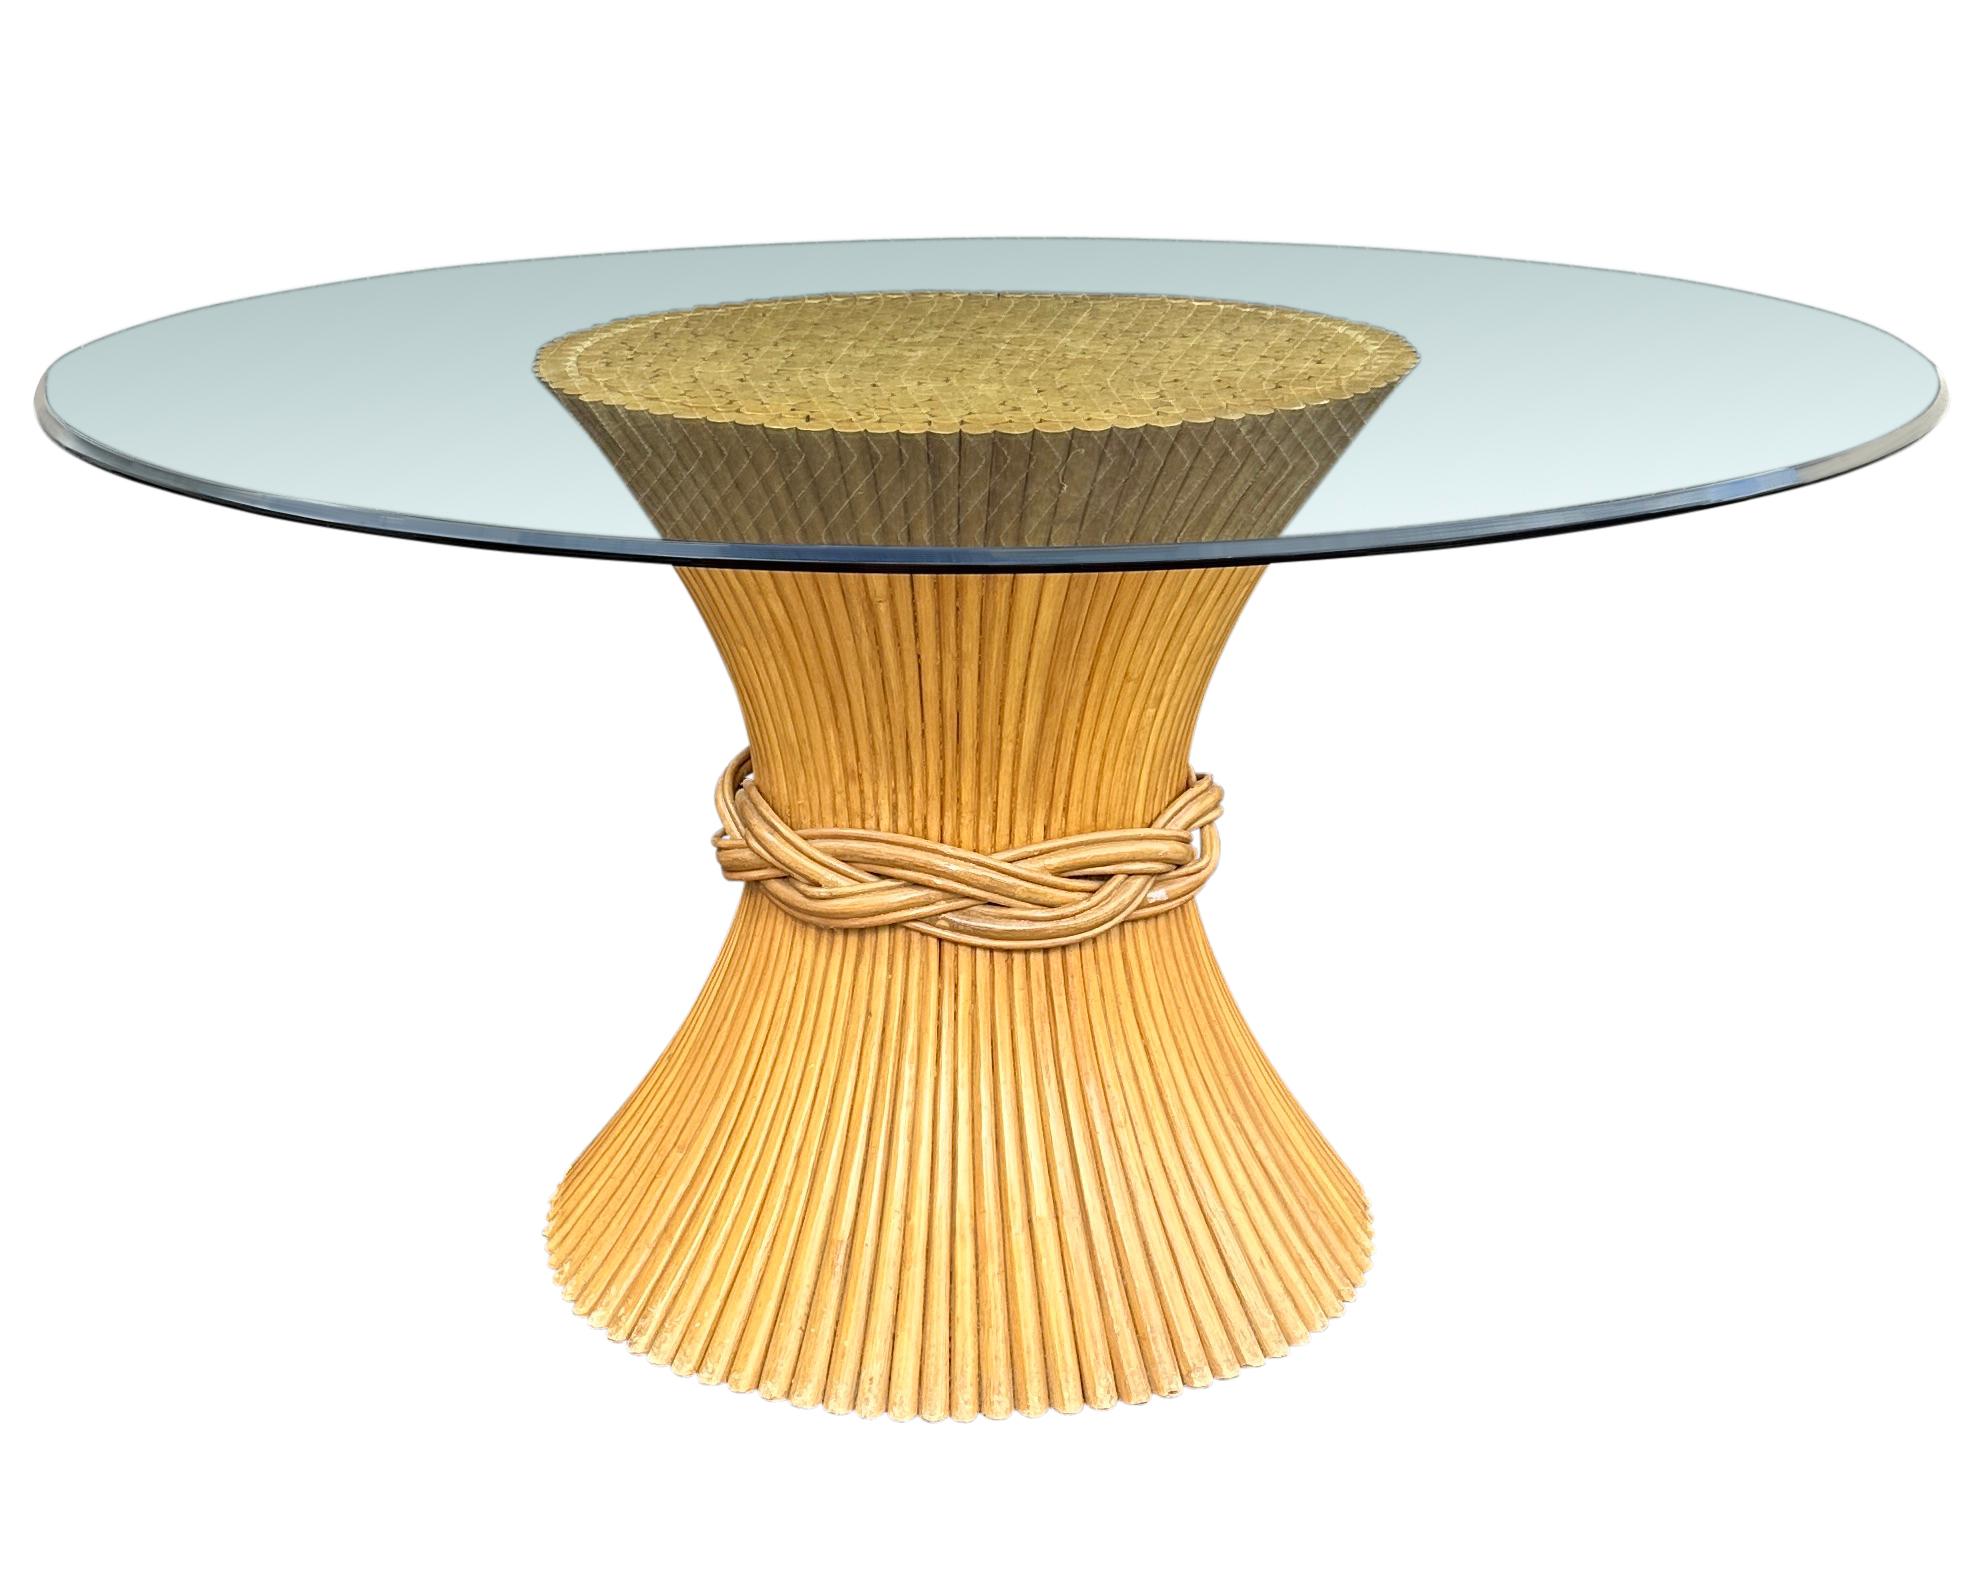 American Sheaf of Wheat Bamboo Pedestal Dining Table by McGuire